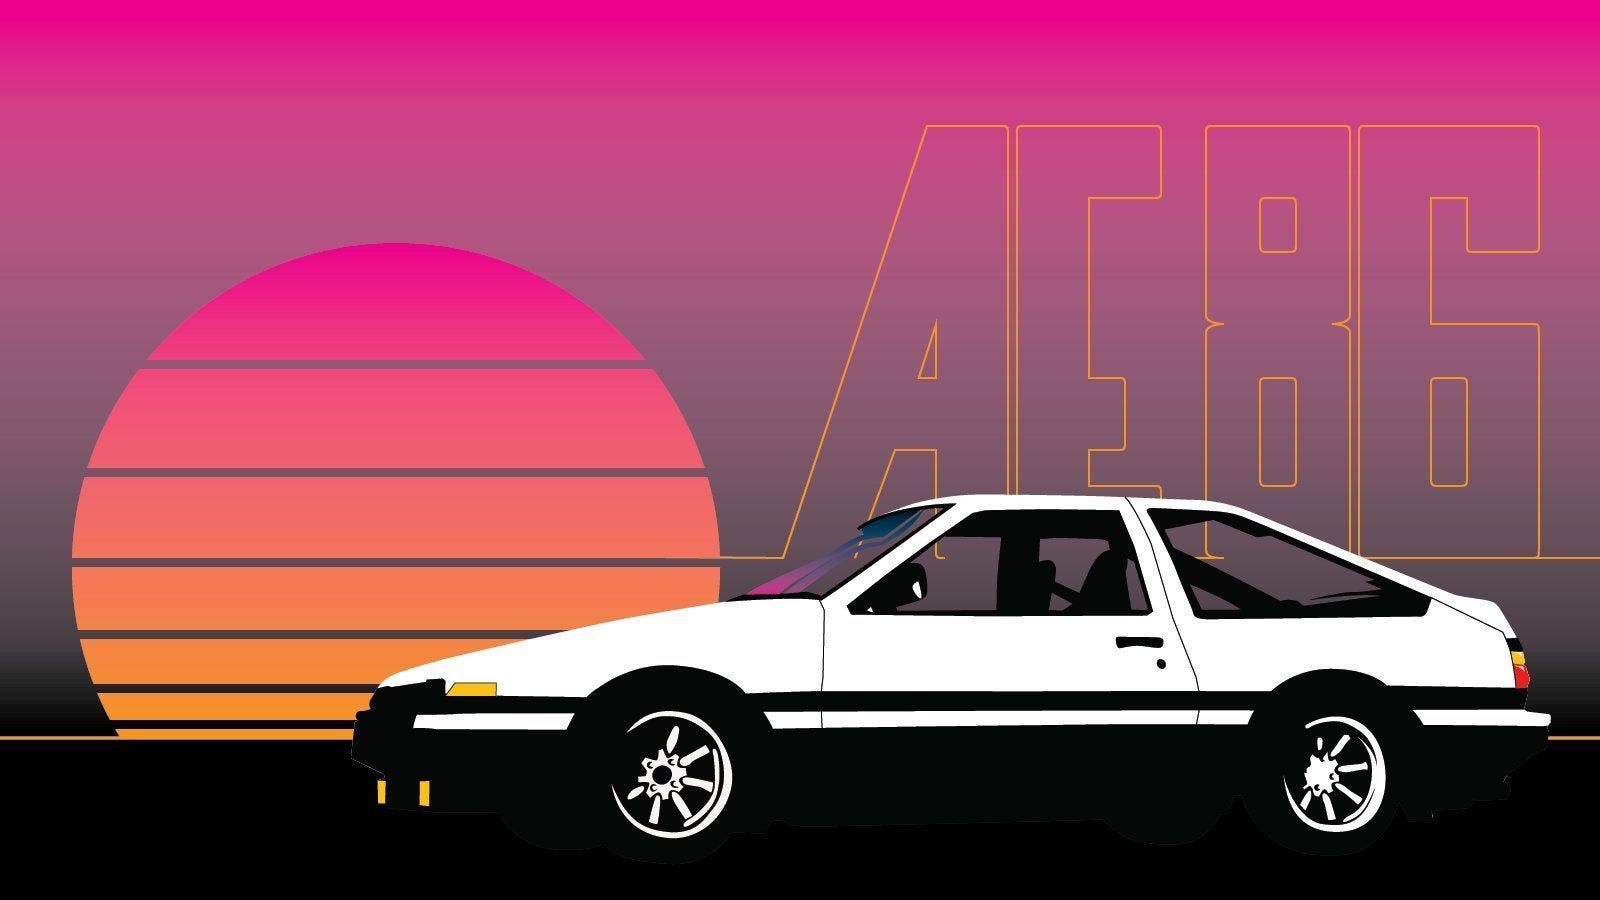 A car is parked in front of an orange sunset - Toyota AE86